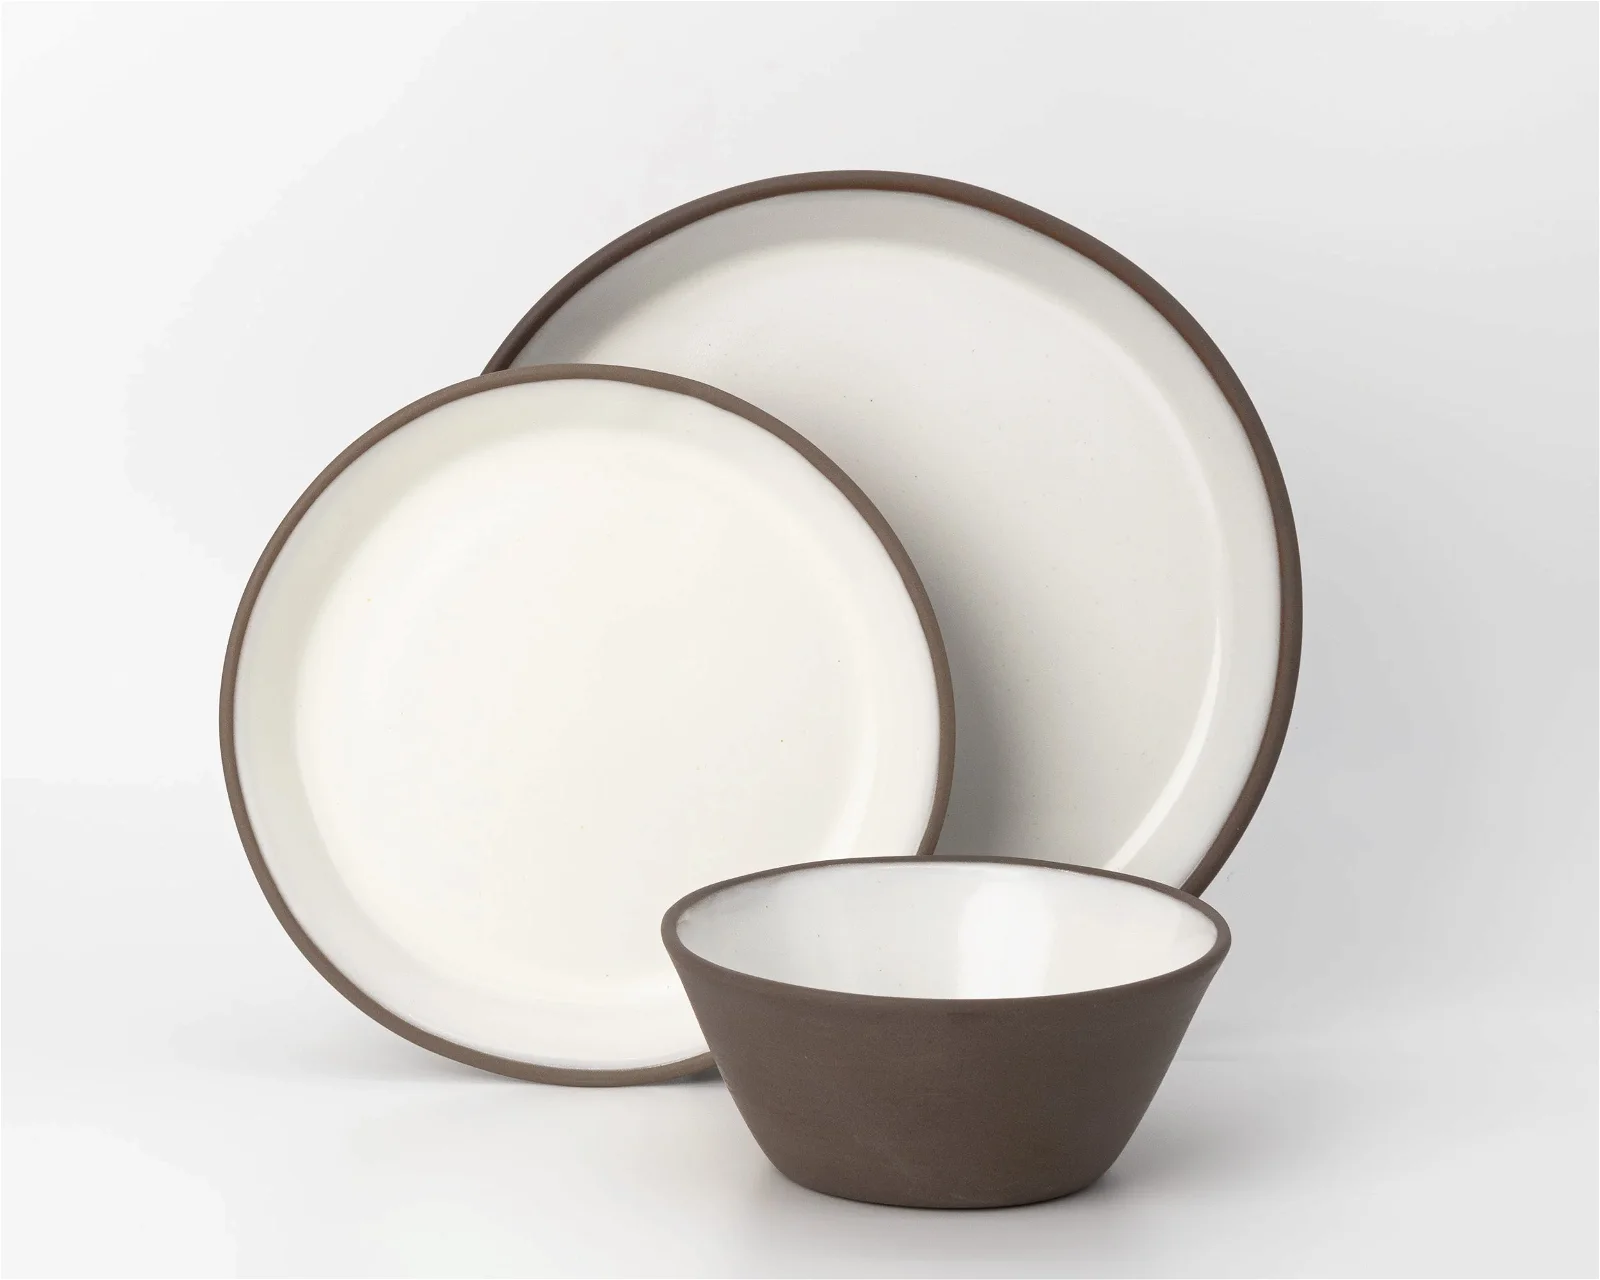 Image of 3 Piece Skali Coupe Dinner Setting - Seconds